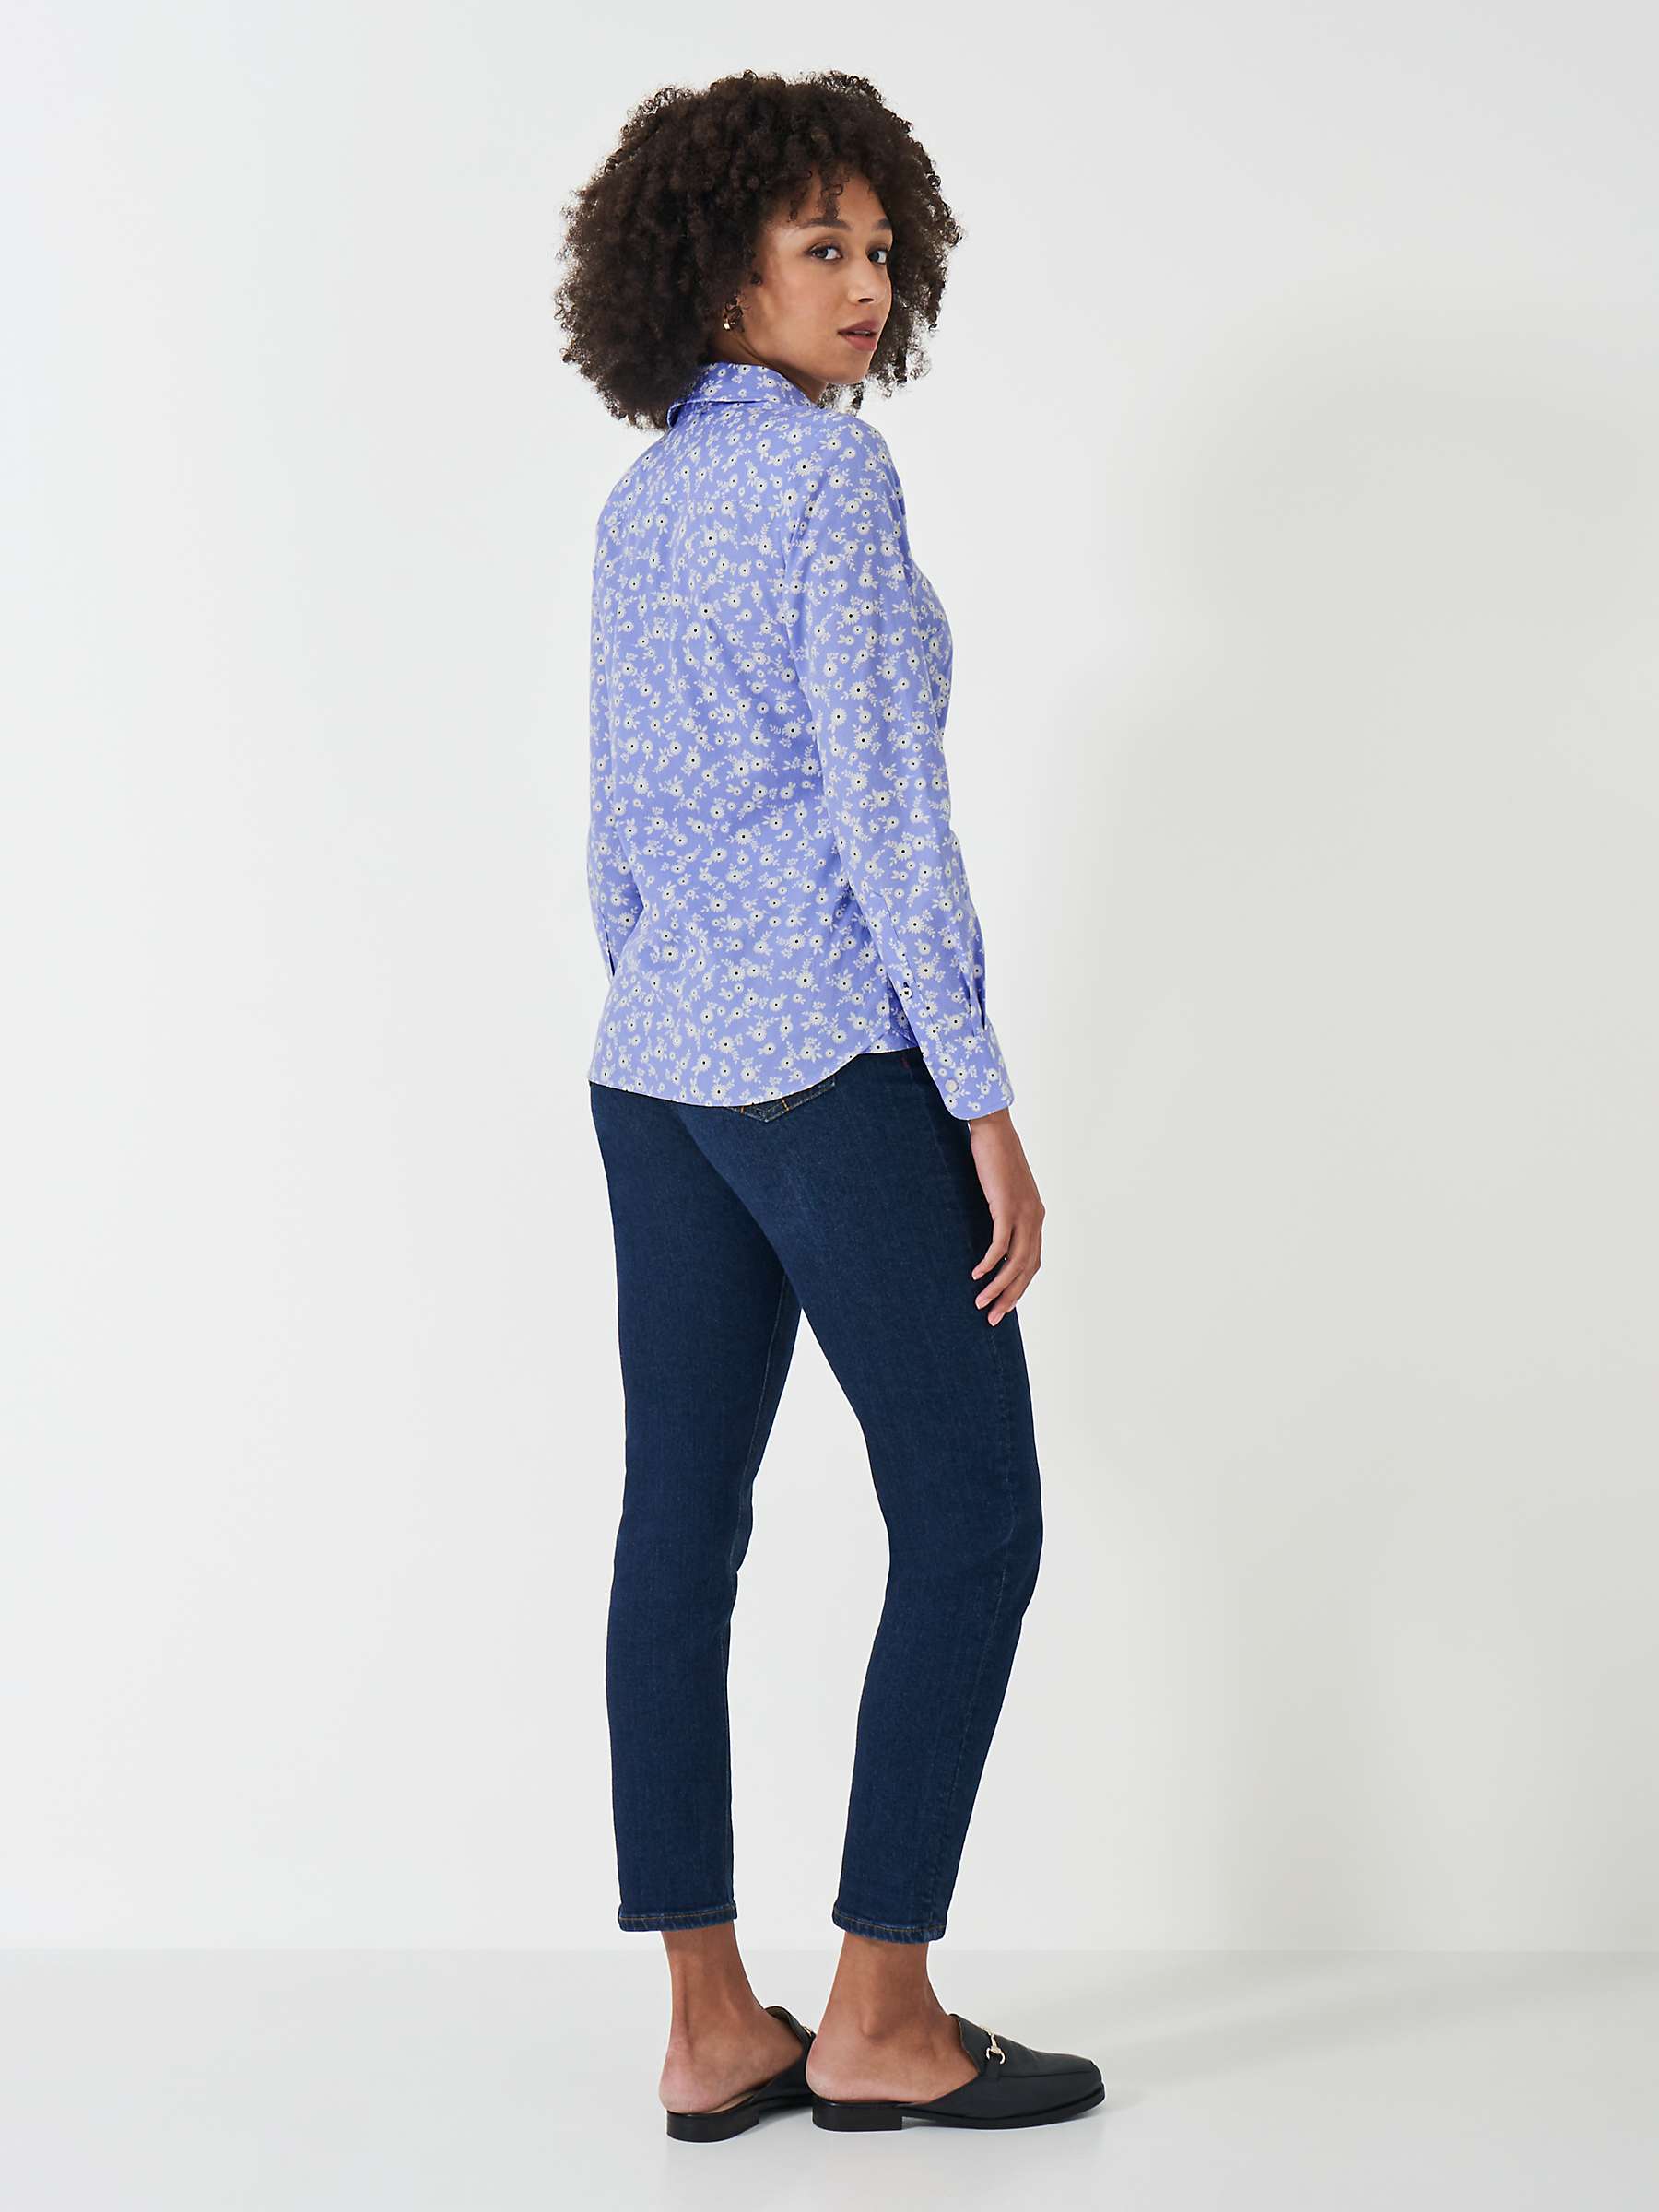 Buy Crew Clothing Lulworth Tailored Floral Print Shirt, Blue/Multi Online at johnlewis.com